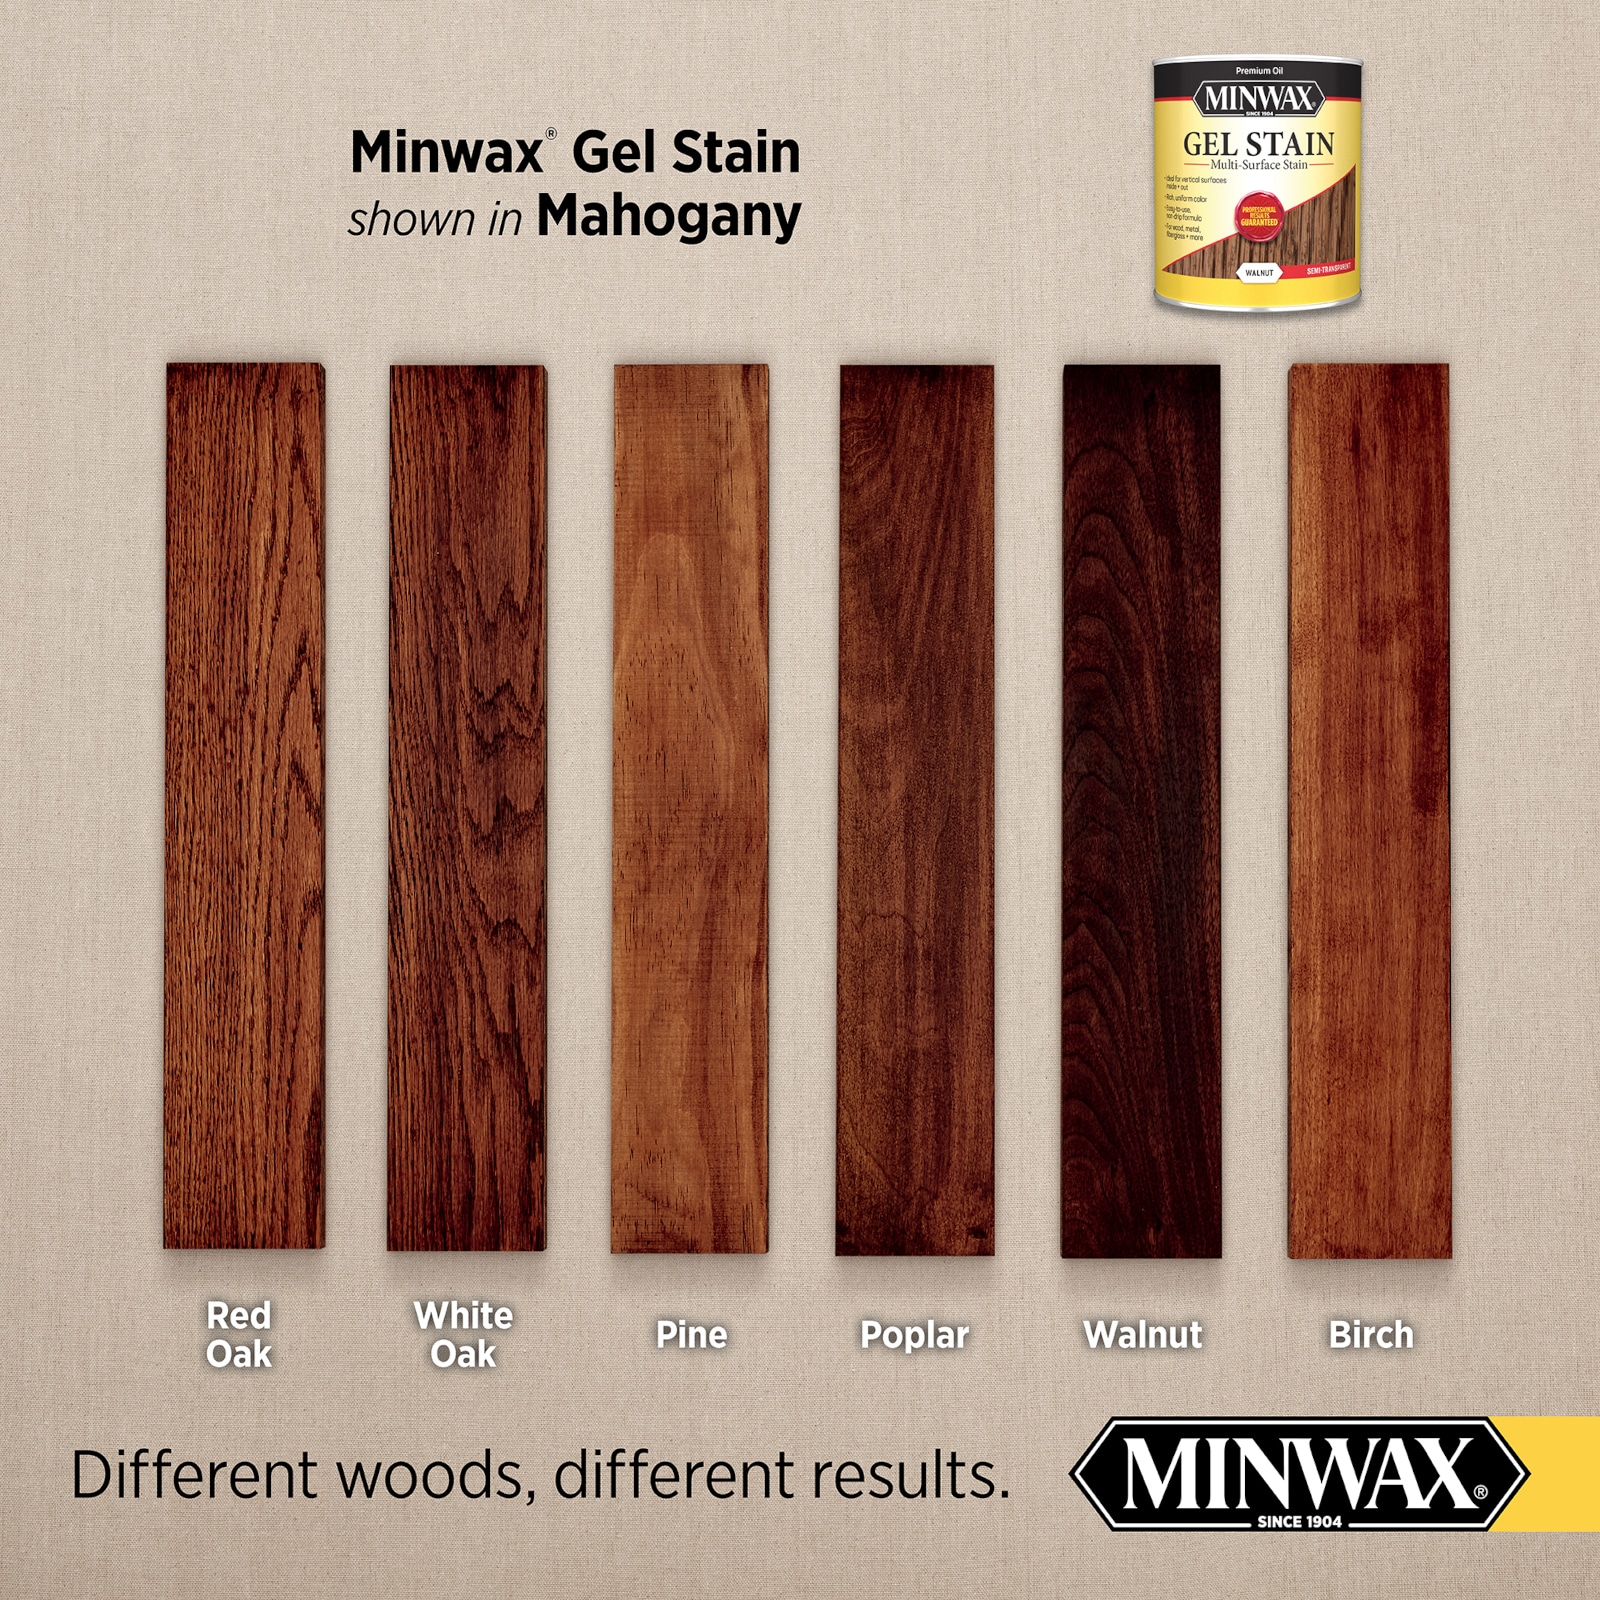 General Finishes BH Gel Stain, 1/2 Pint, Brown Mahogany